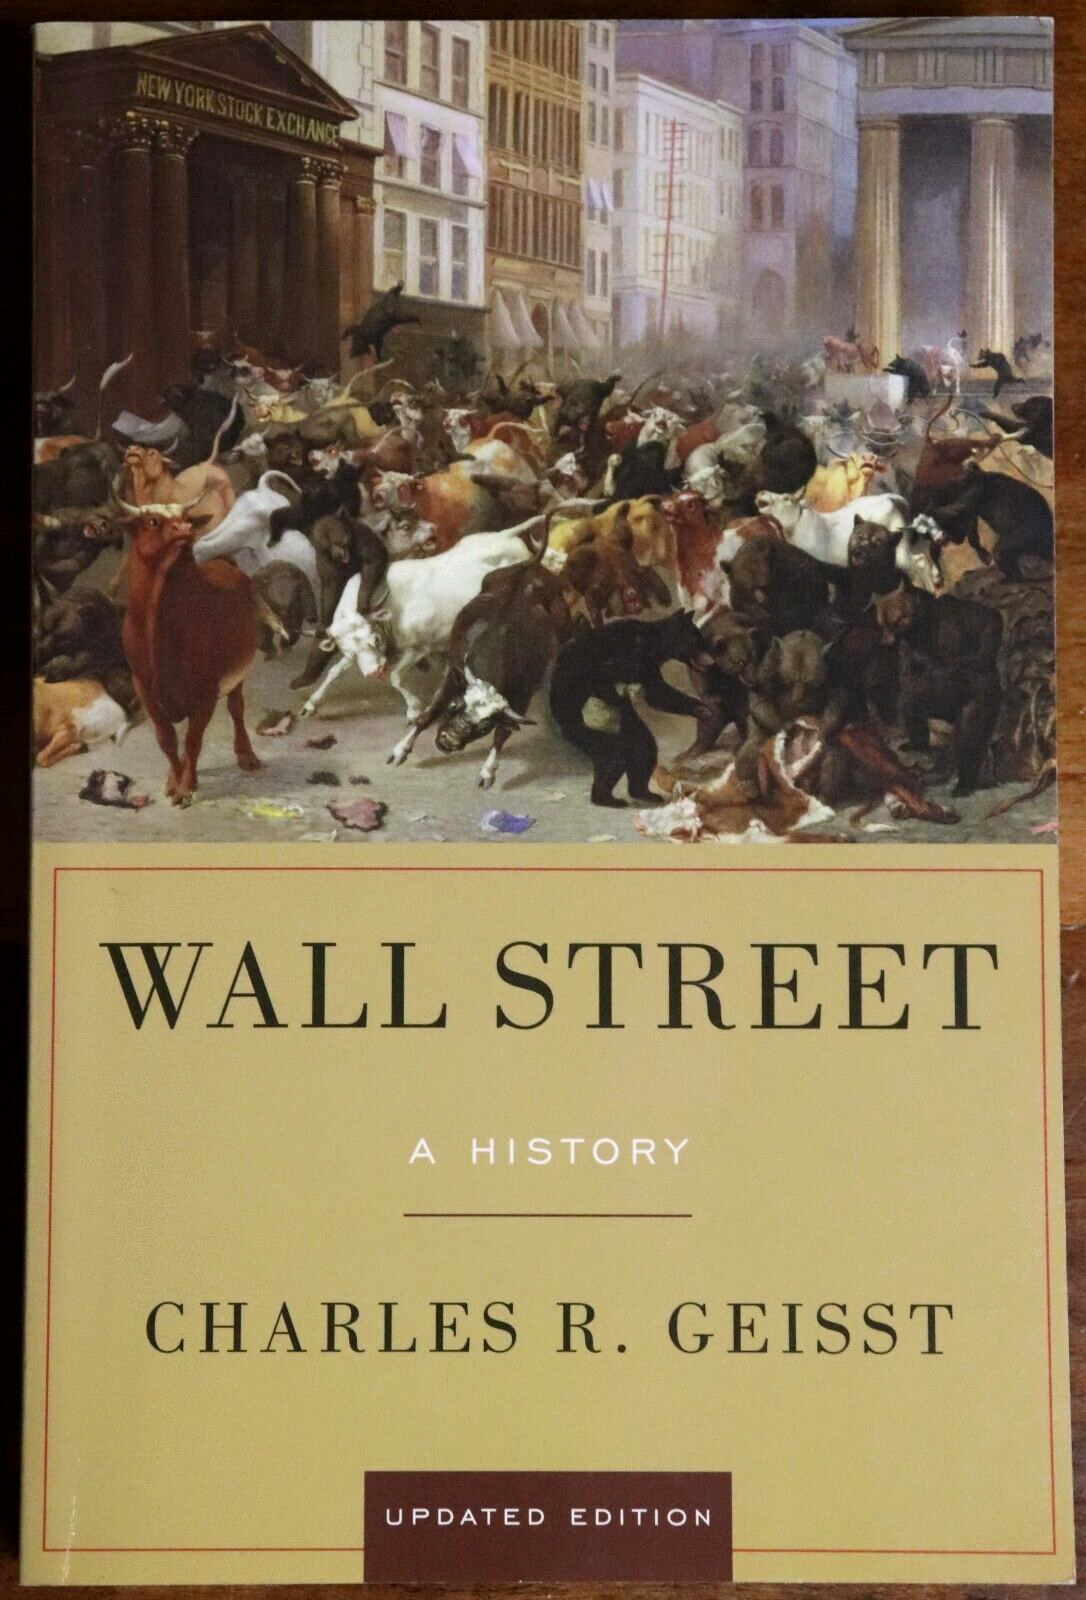 Wall Street: A History by Charles R Geisst - 2012 - Financial History Book